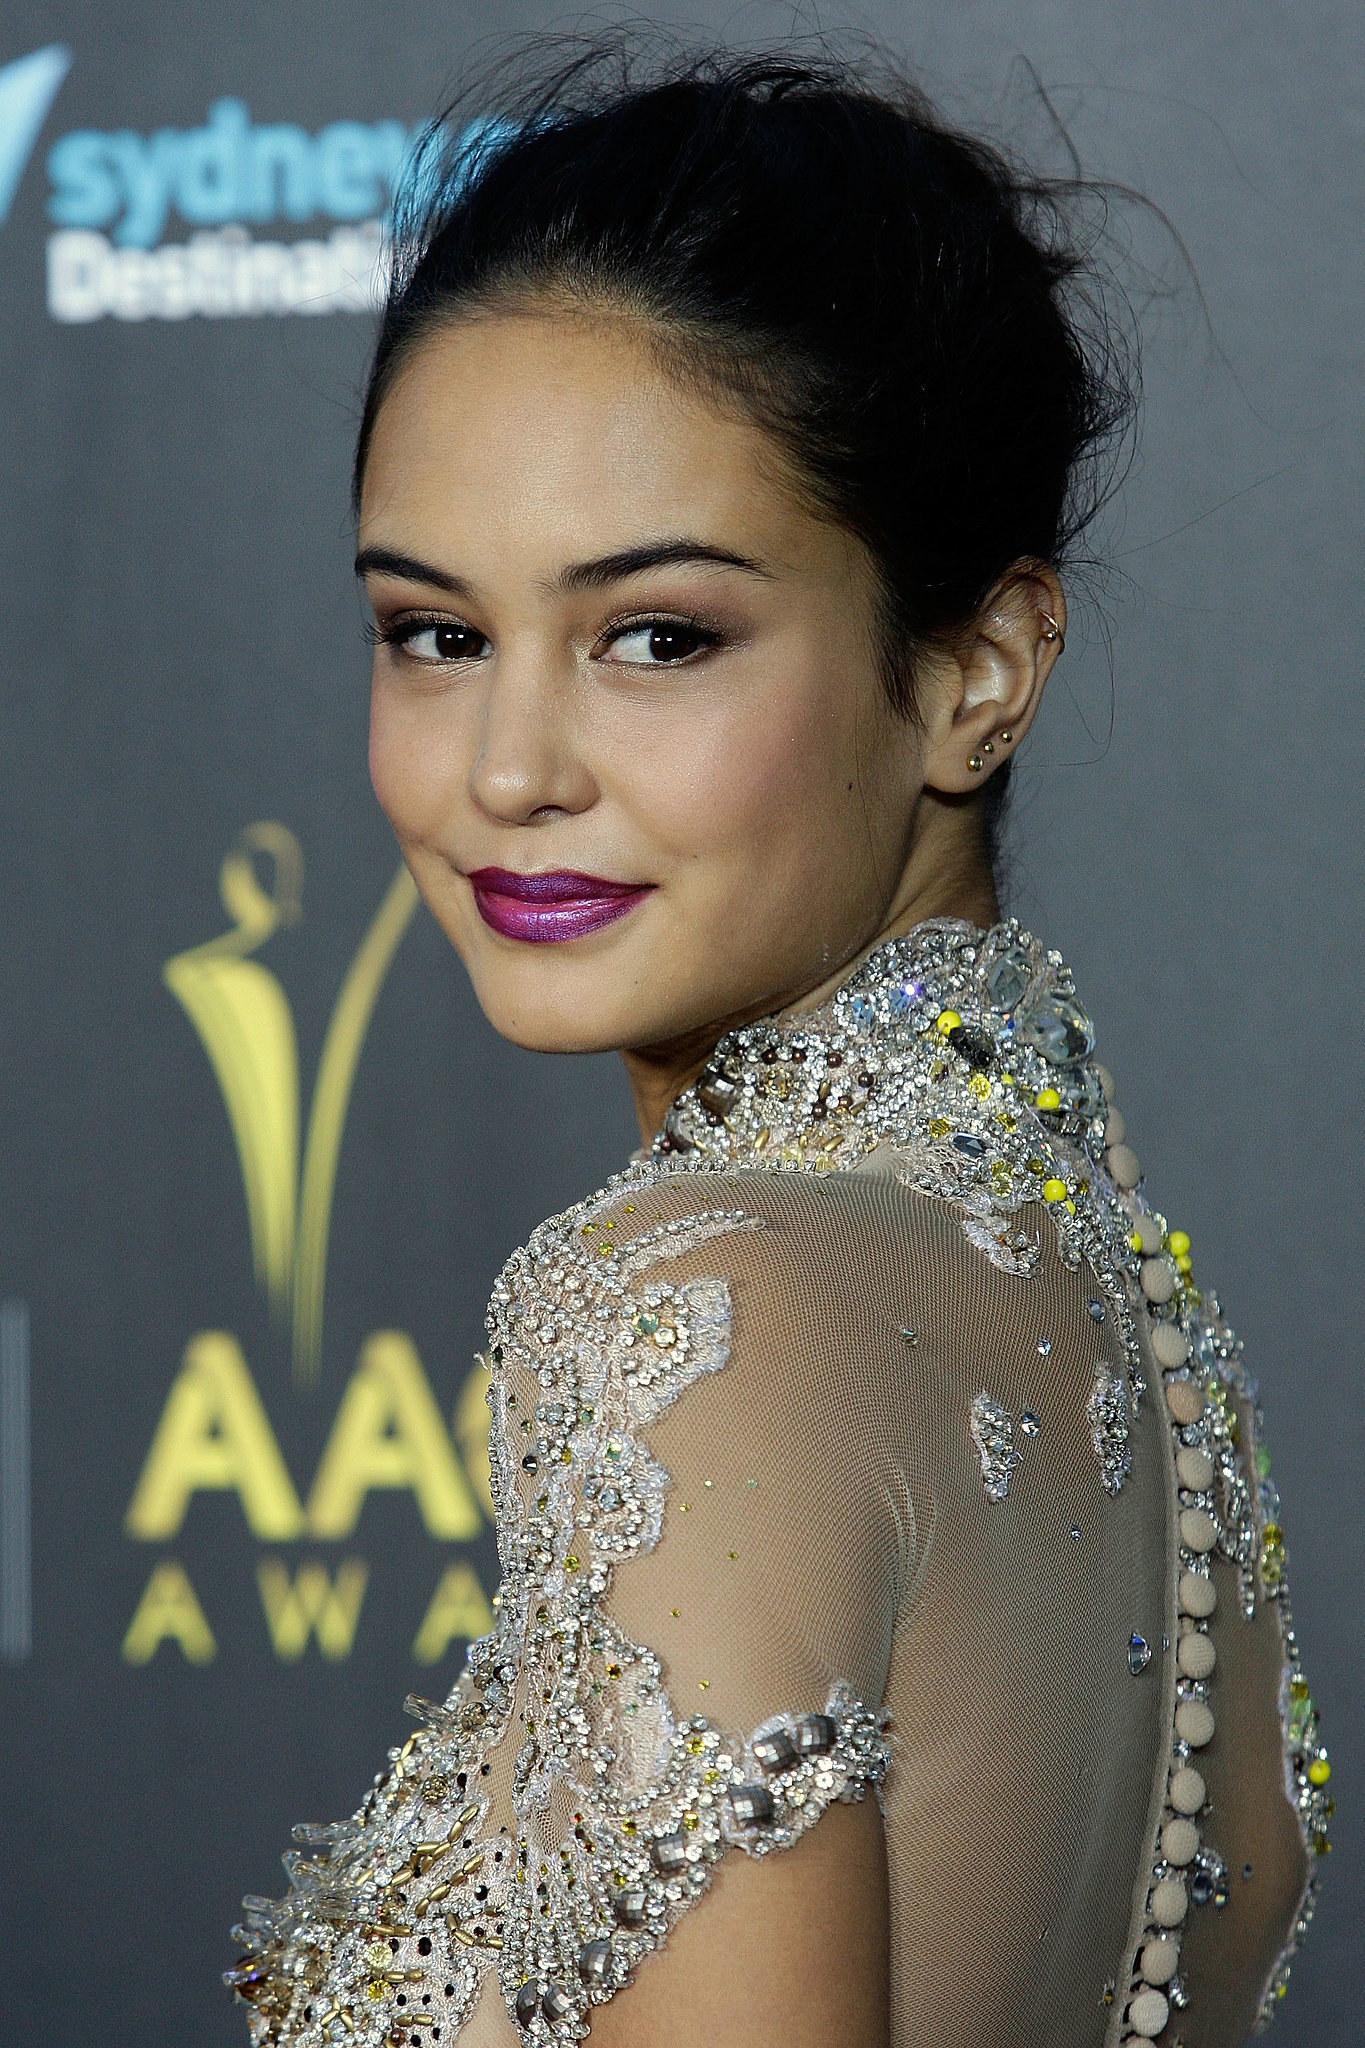 General photo of Courtney Eaton